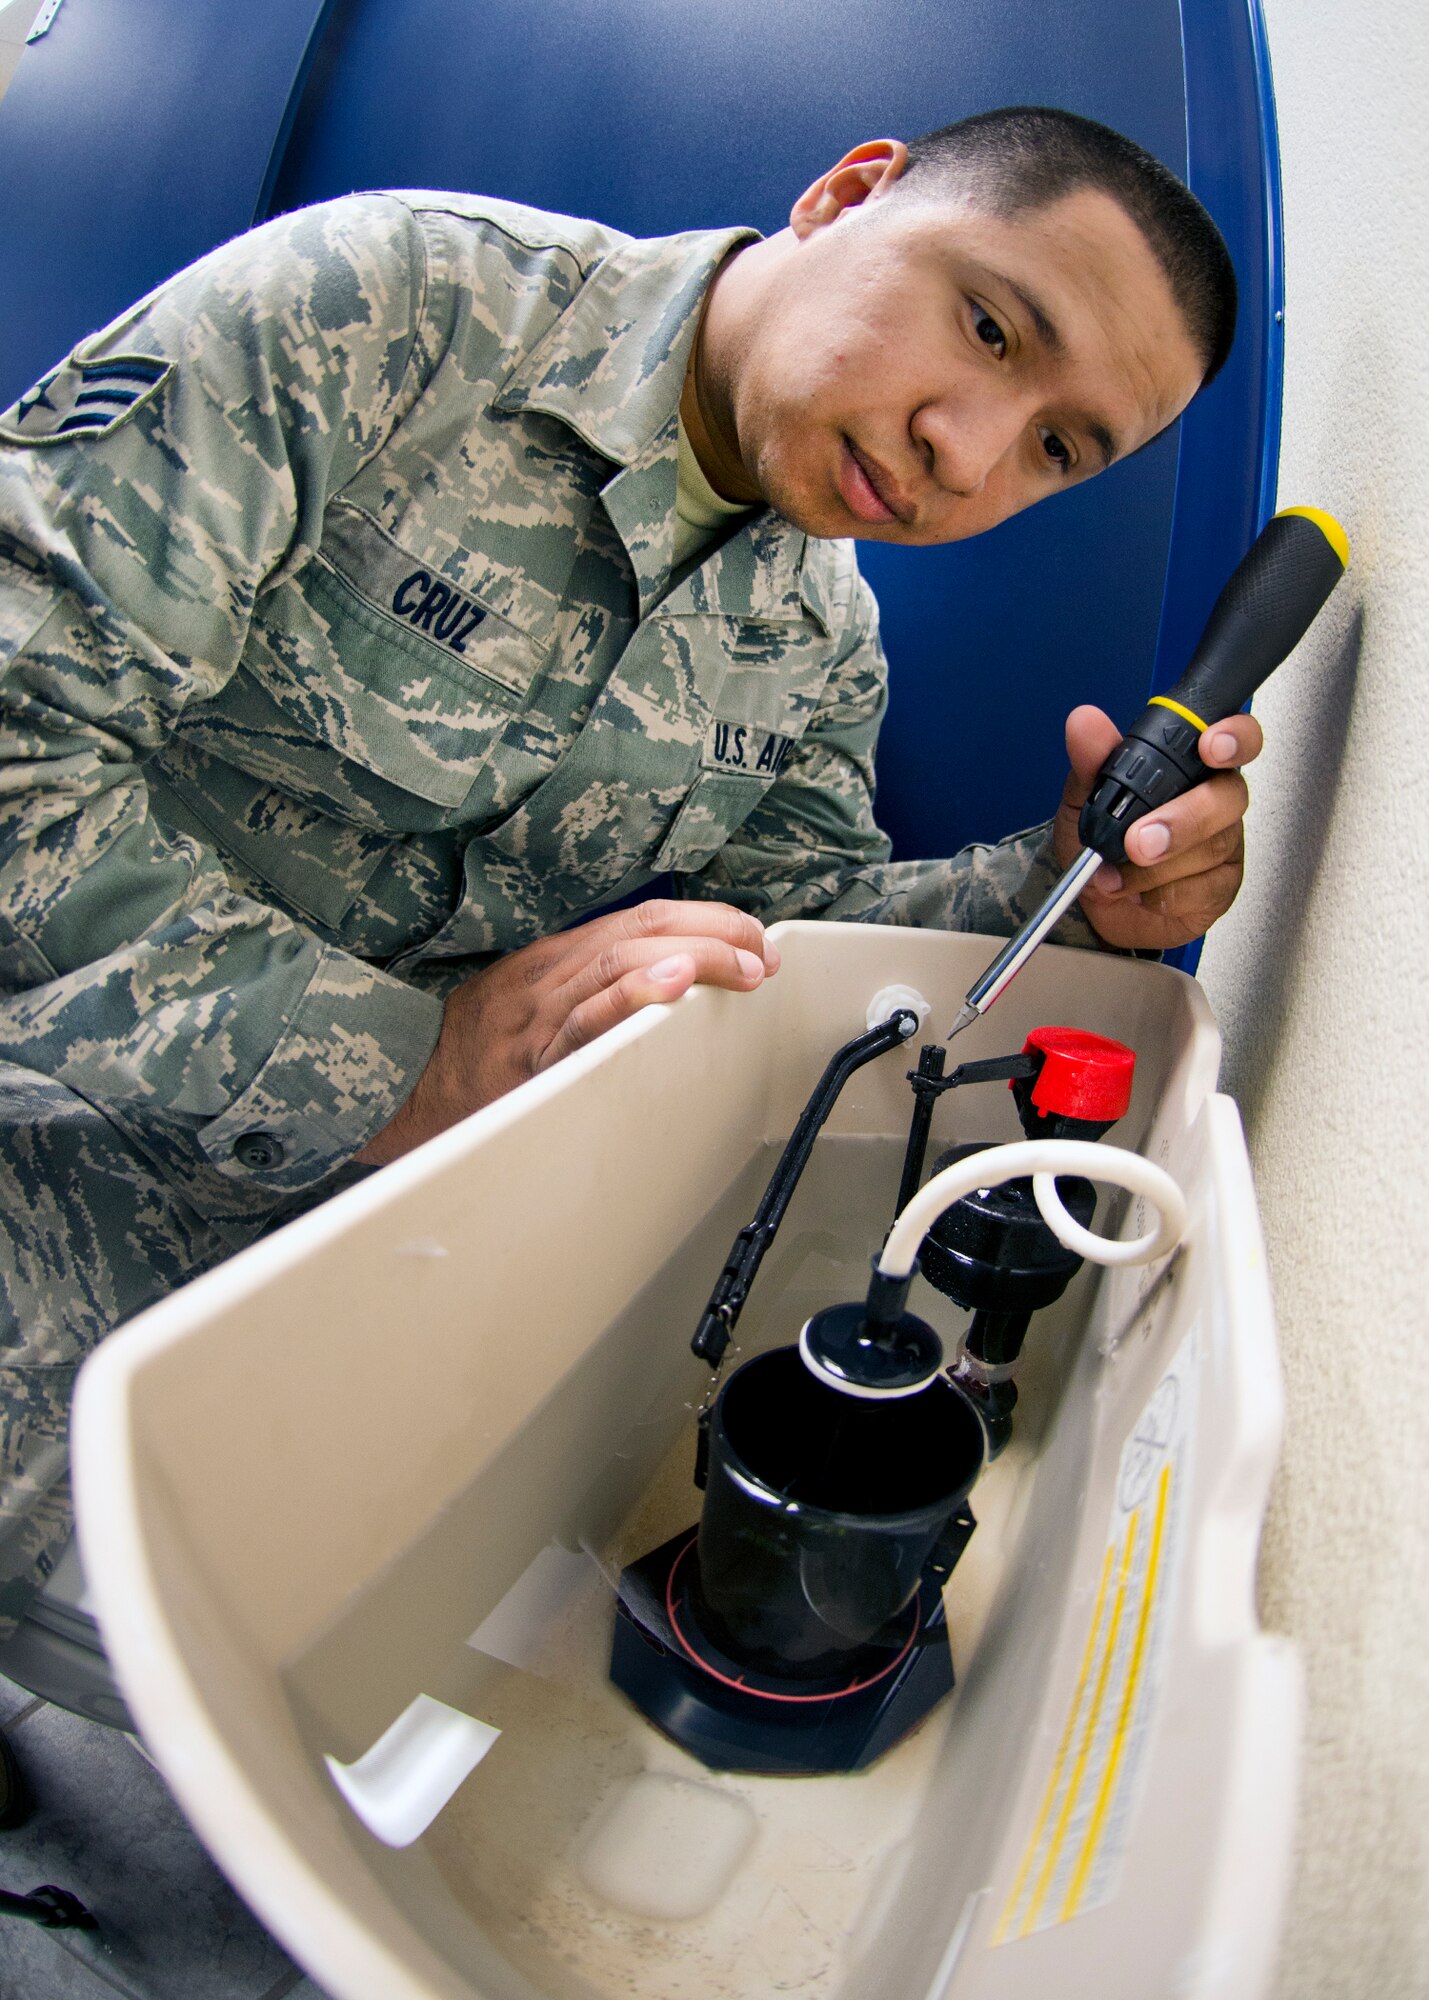 Senior Airman Lisandro Cruz Mendez, 60th Civil Engineering Squadron water and fuels maintenance journeyman, readjusts a commode tank fixture to conserve water. According to Cruz Mendez, a slowly leaking toilet can waste 1.6 gallons of water in a hour, 40 gallons in 24 hours and 1,200 gallons in 30 days.